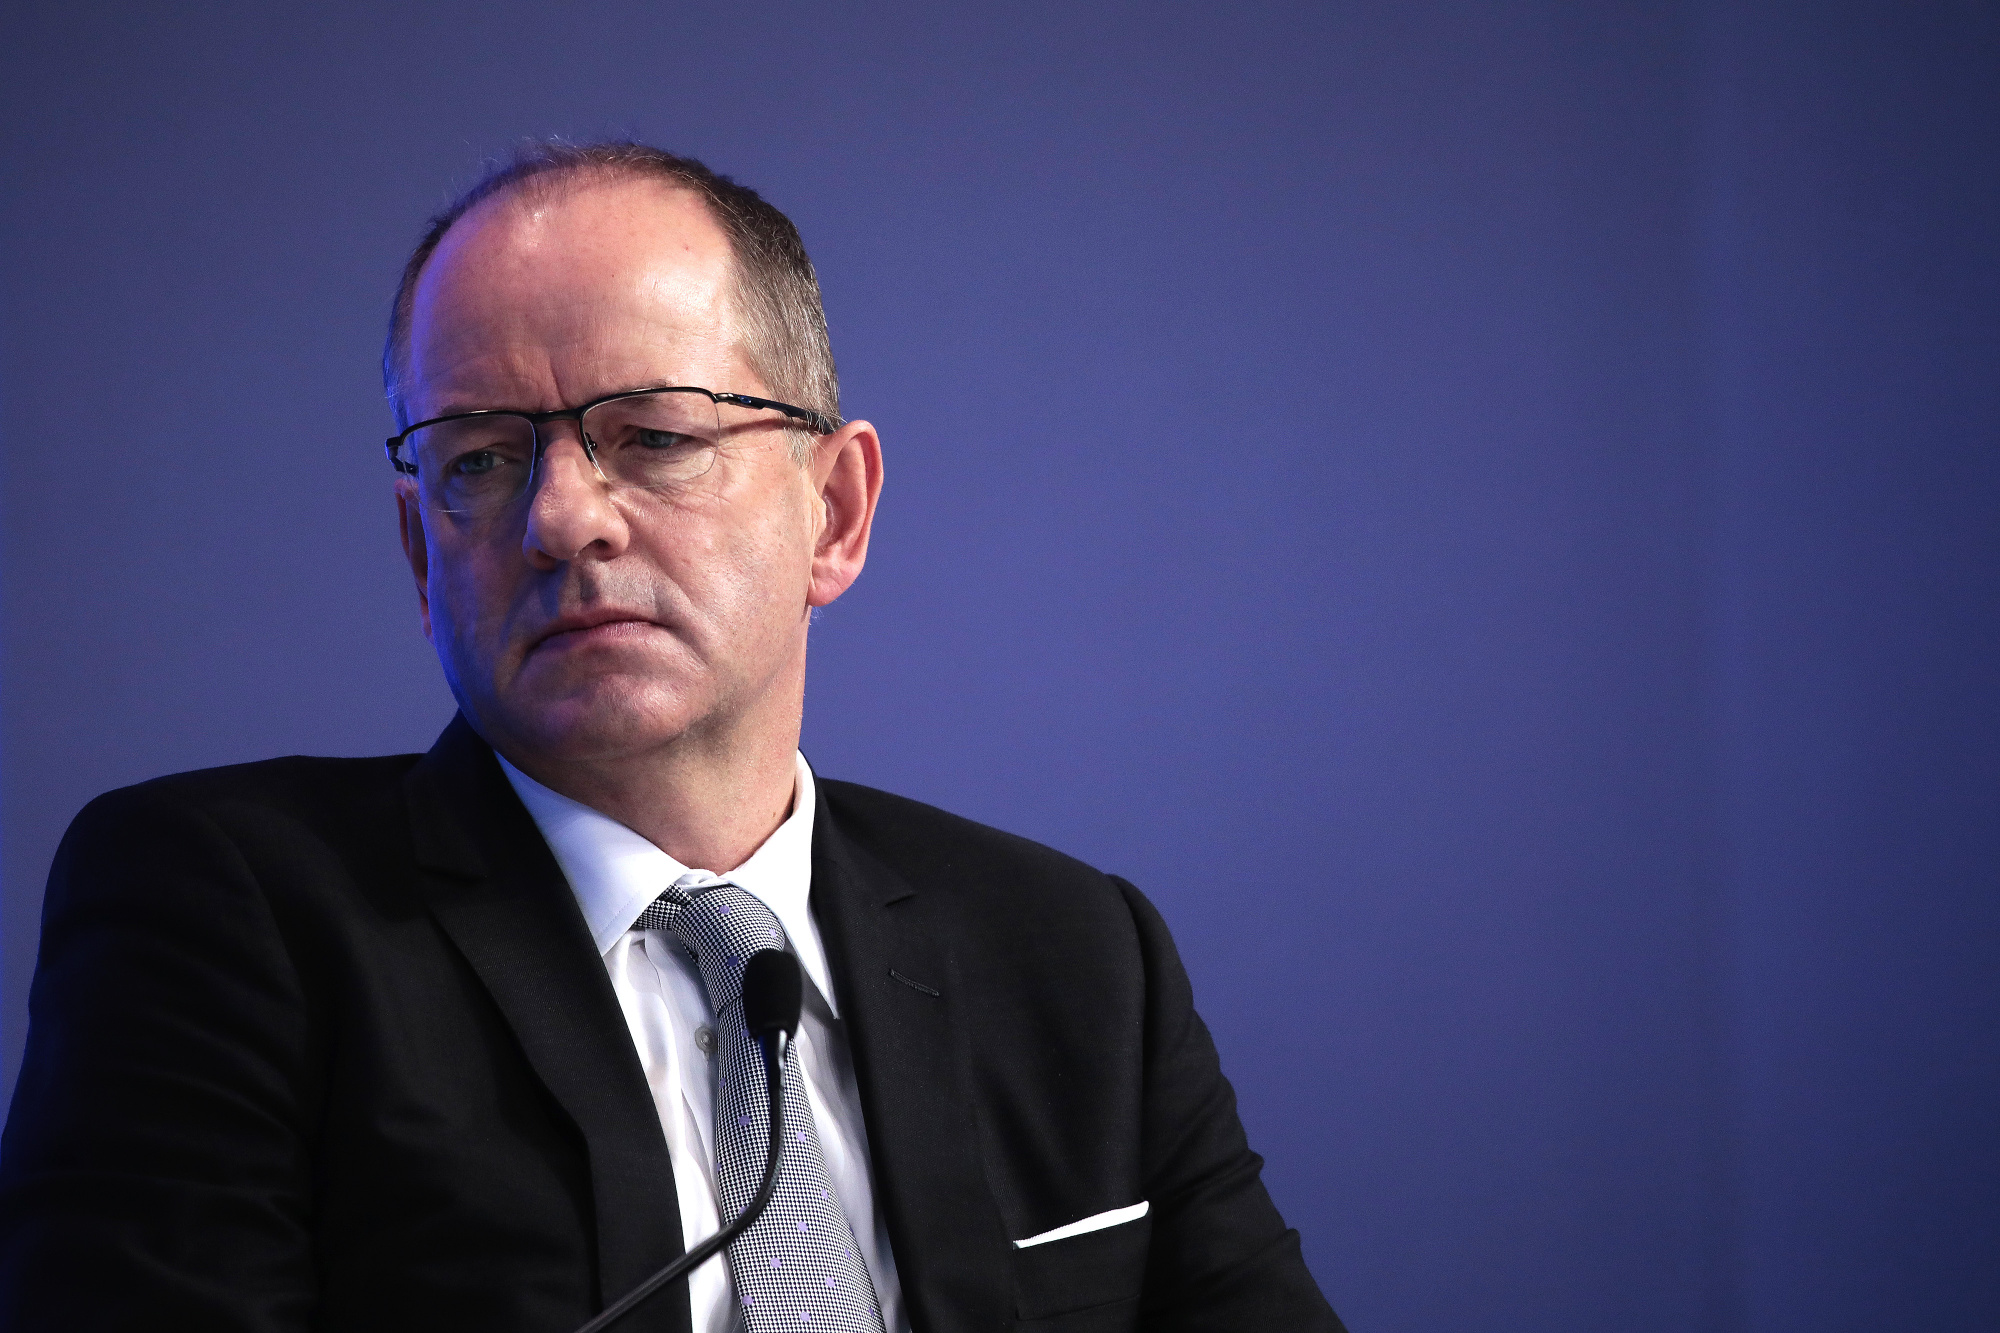 UnitedHealth (UNH) CEO Andrew Witty Sees Better Blending of Key Units